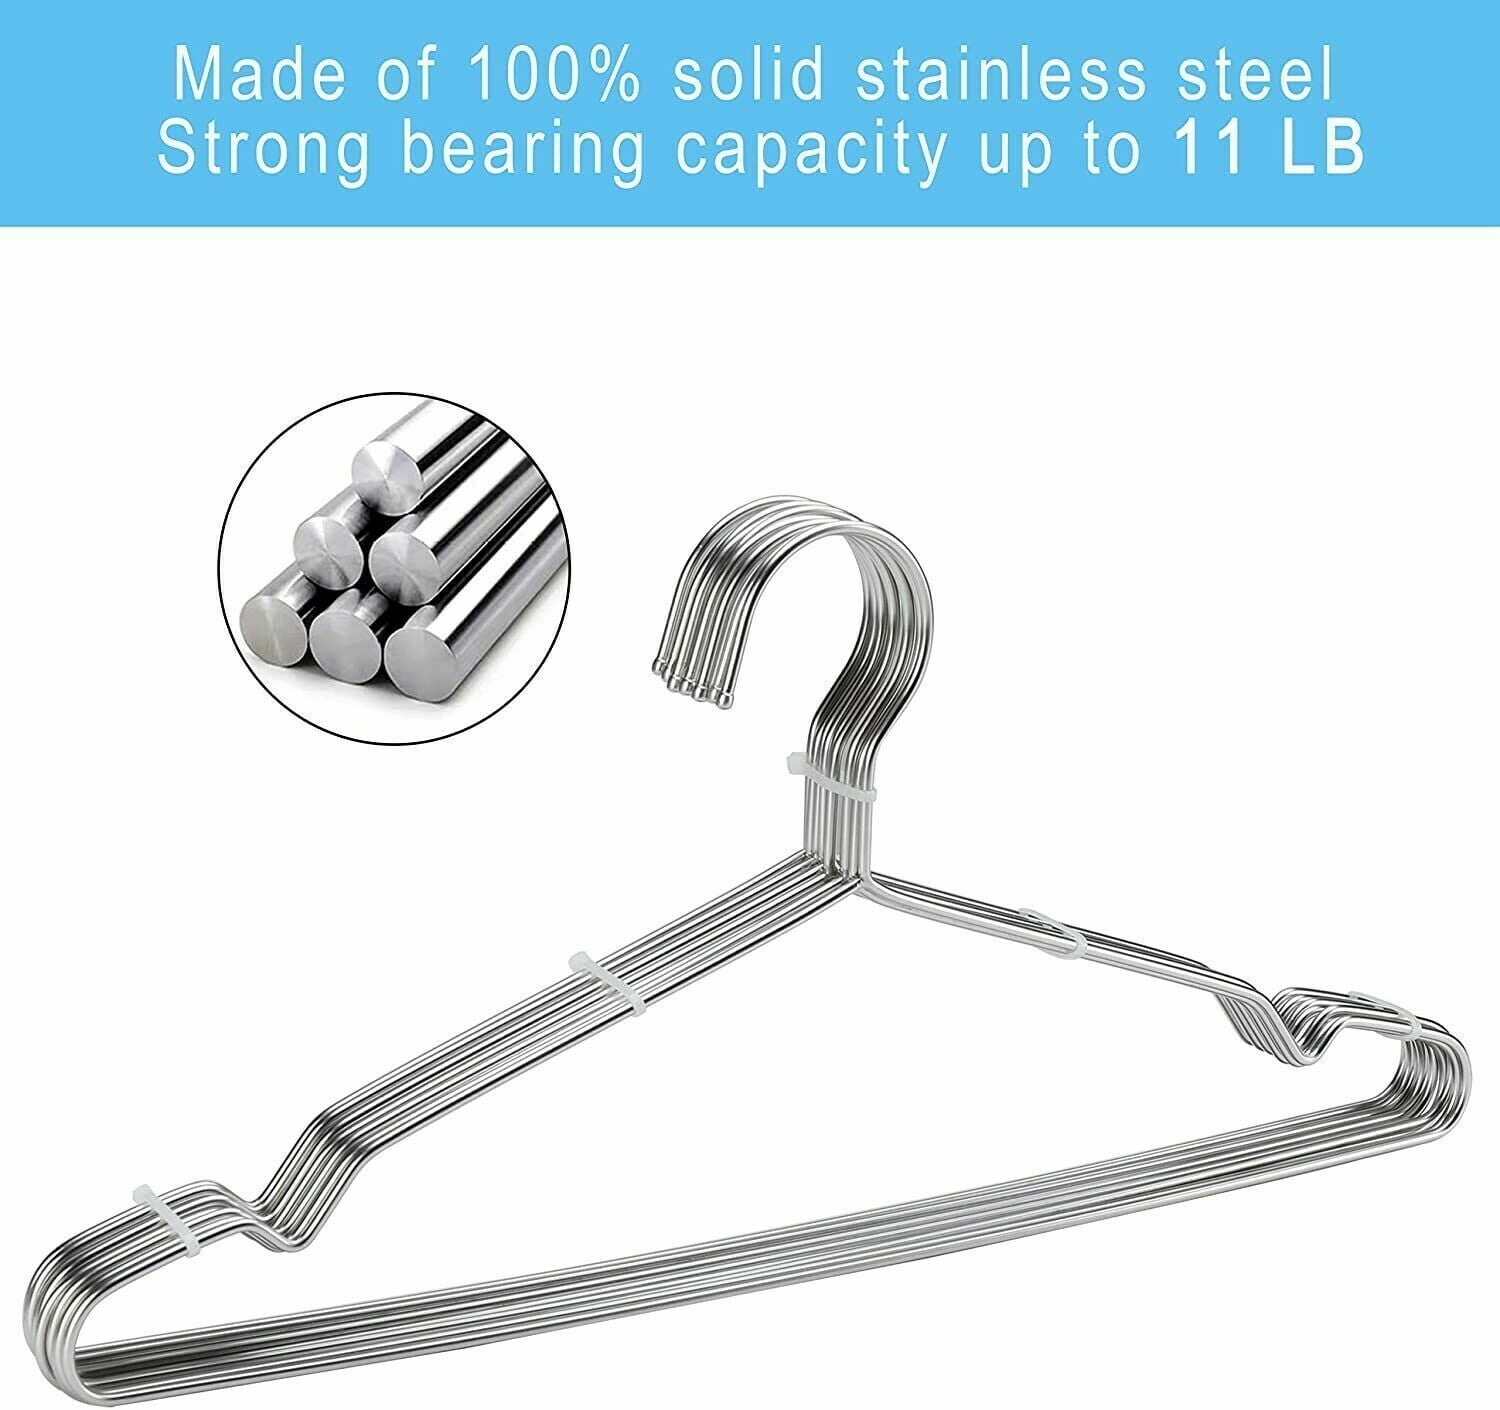 Metal Wire Hanger  Strong Silver Coat Clothes Steel Water Proof